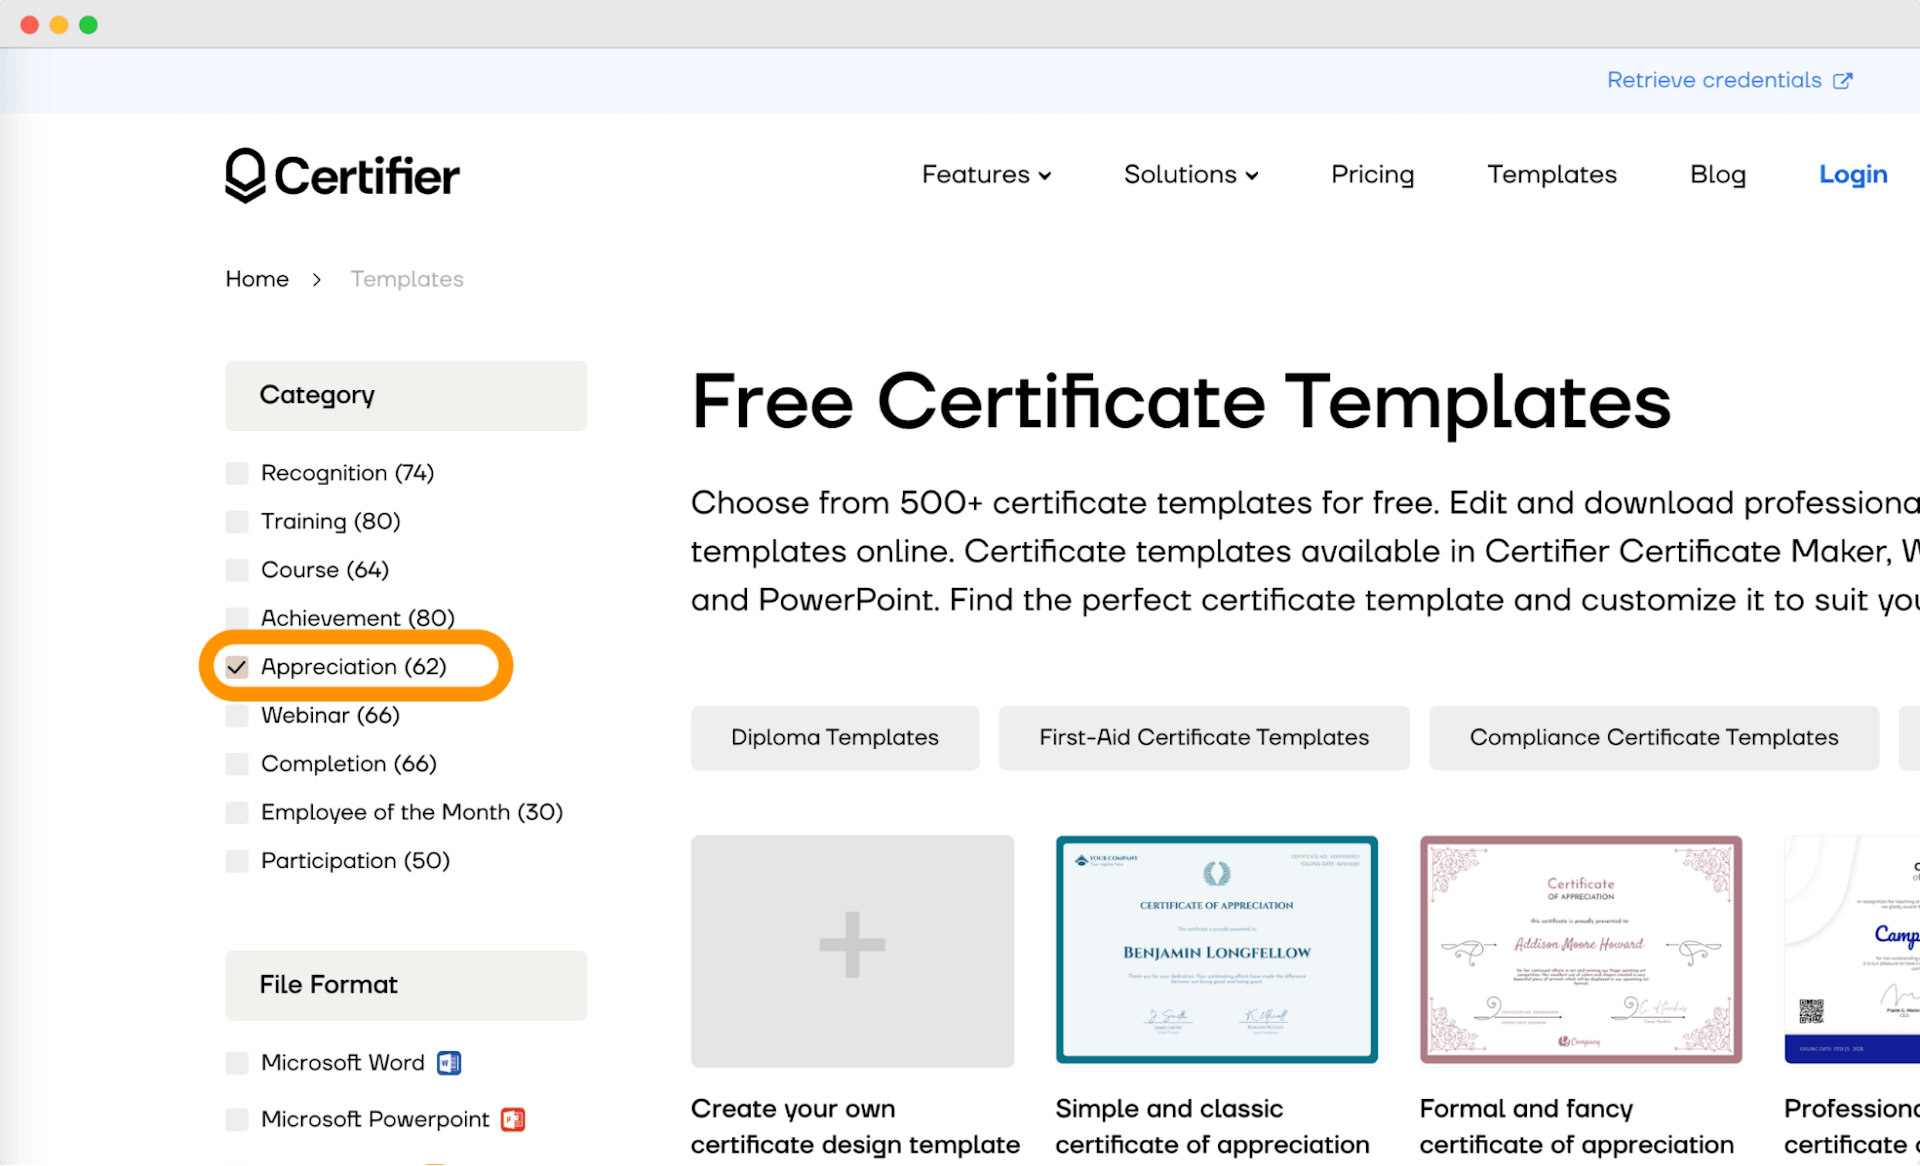 Certificate of appreciation template library with diiferent layout and designs to download or edit with Certifier.